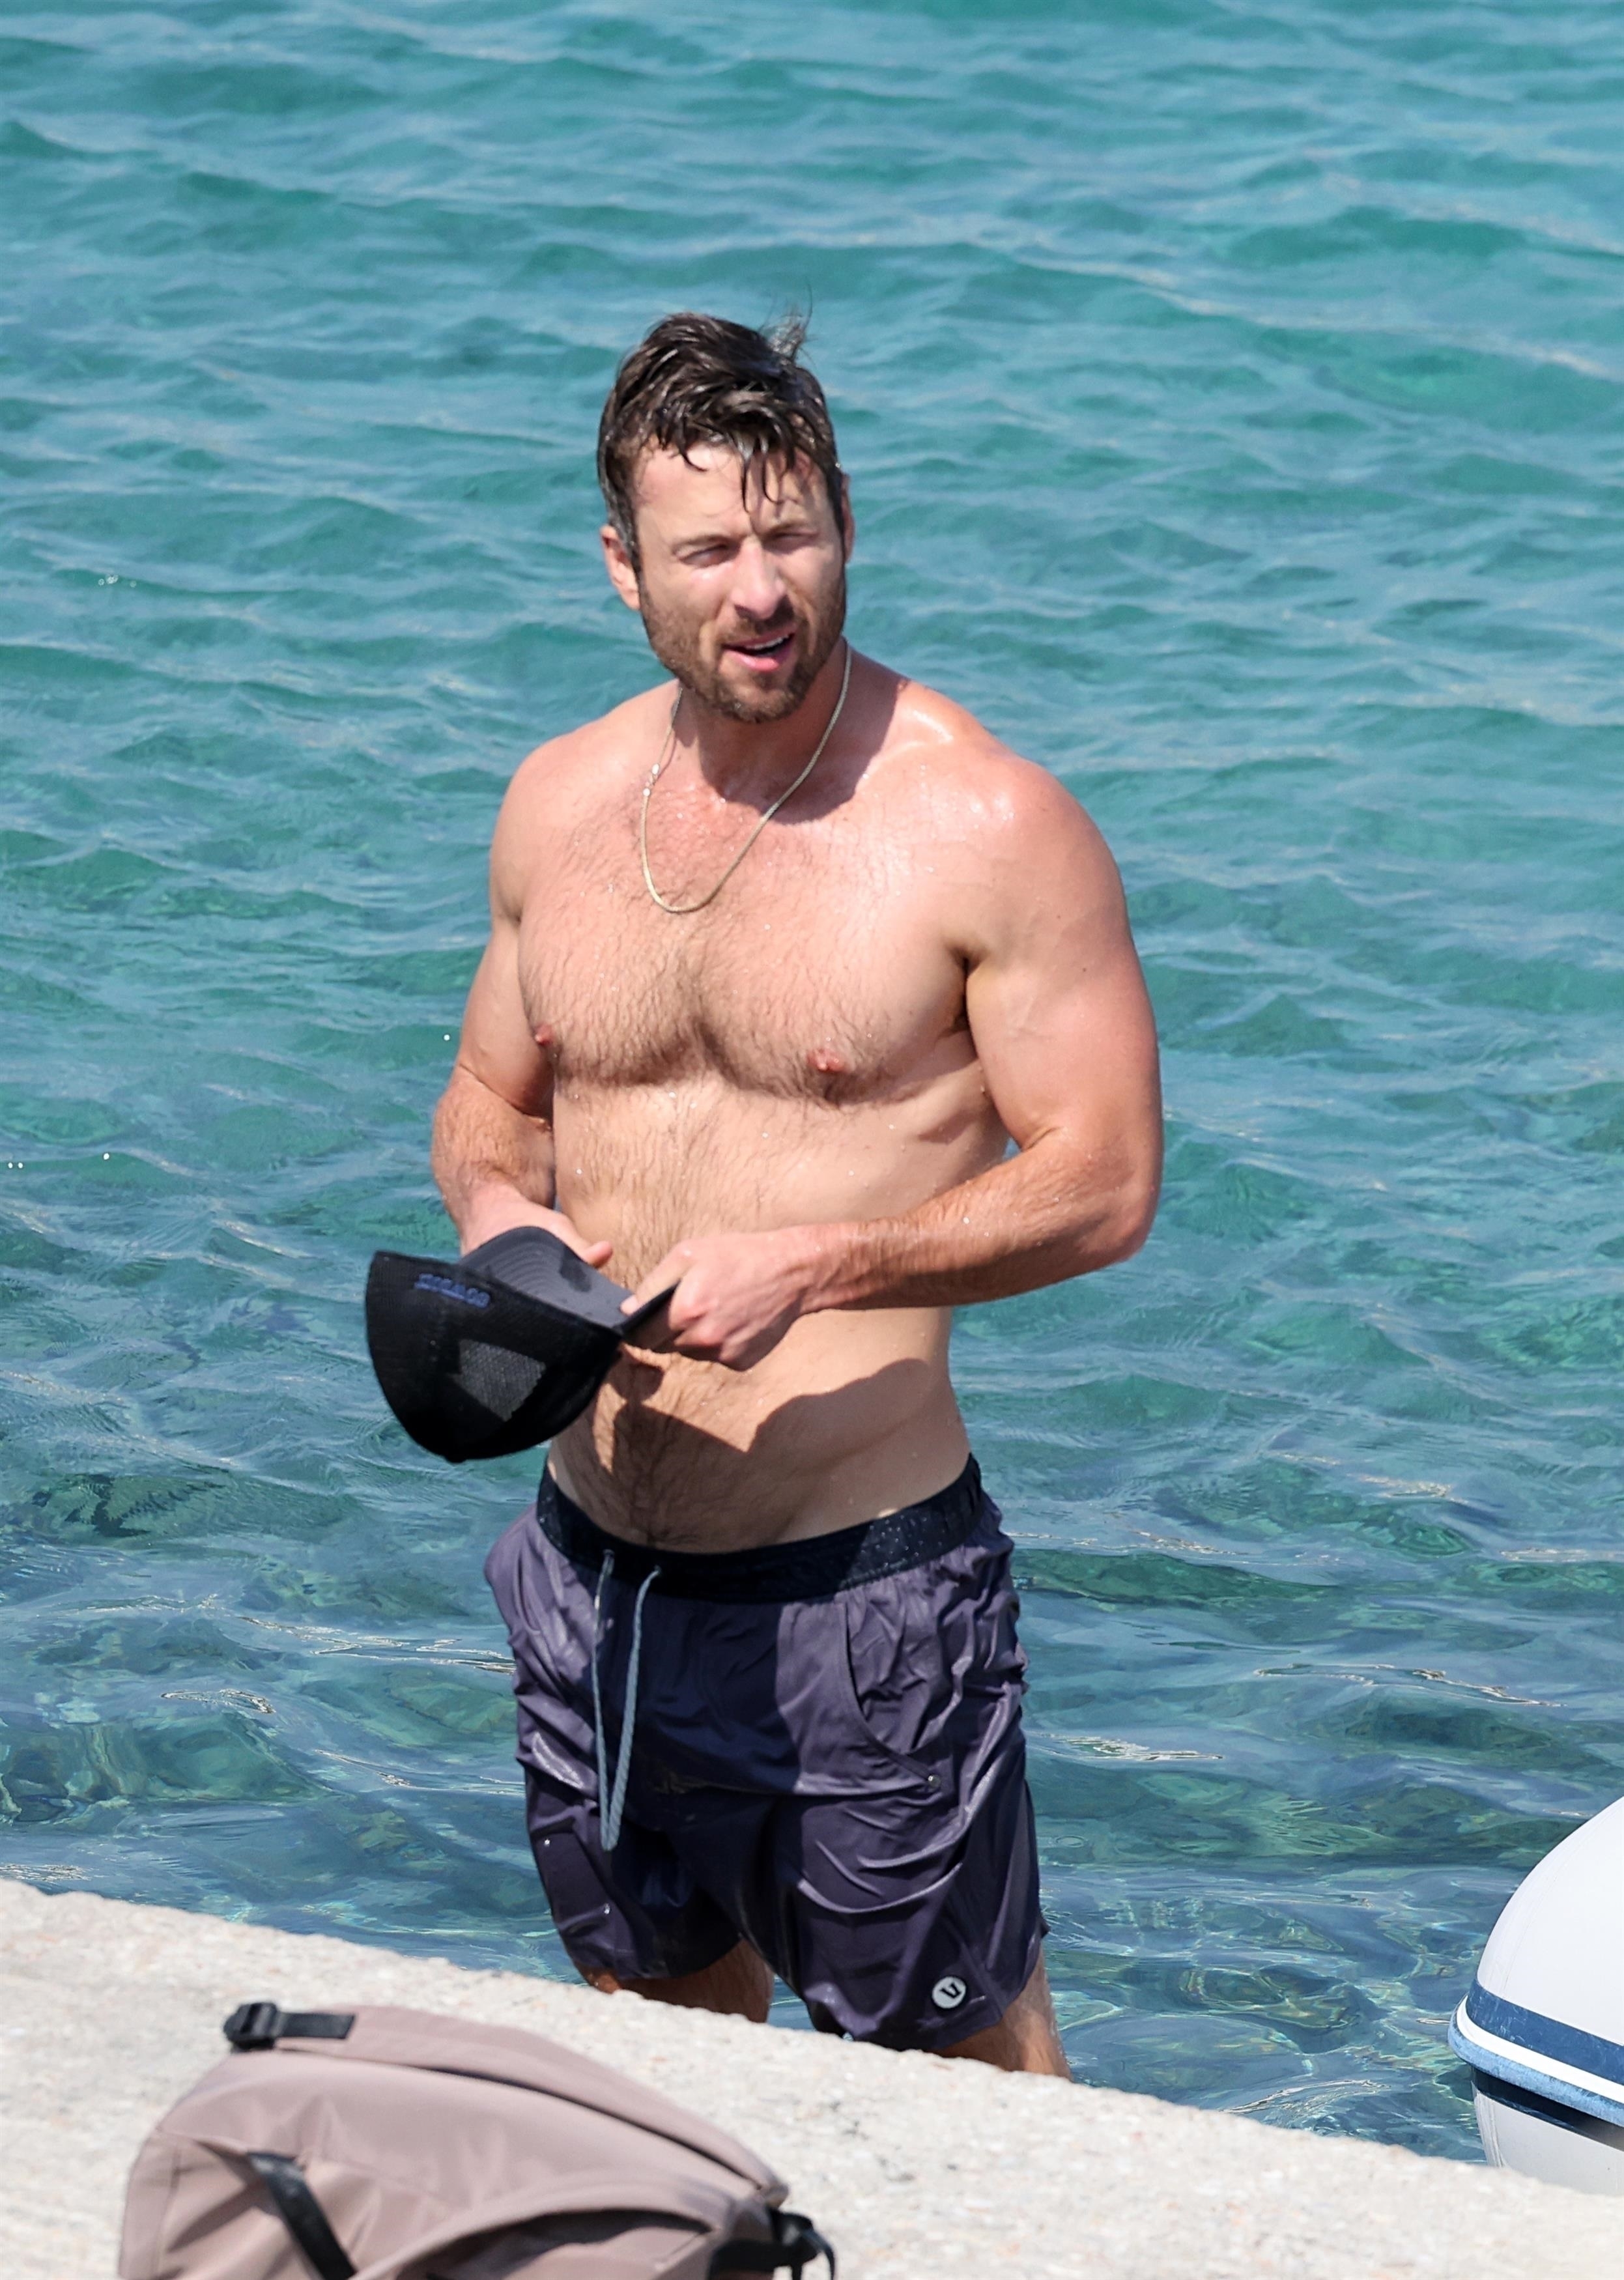 <p>"Top Gun: Maverick" star Glen Powell joined actor pals Chord Overstreet and Lamorne Morris (not pictured) in Mykonos, Greece, for a sun-soaked vacation on Aug. 15.</p><p>MORE: <a href="https://www.msn.com/en-us/community/channel/vid-kwt2e0544658wubk9hsb0rpvnfkttmu3tuj7uq3i4wuywgbakeva?item=flights%3Aprg-tipsubsc-v1a&ocid=social-peregrine&cvid=333aa5de5a654aa7a98a6930005e8f60&ei=2" rel="noreferrer noopener">Follow Wonderwall on MSN for more fun celebrity & entertainment photo galleries and content</a></p>